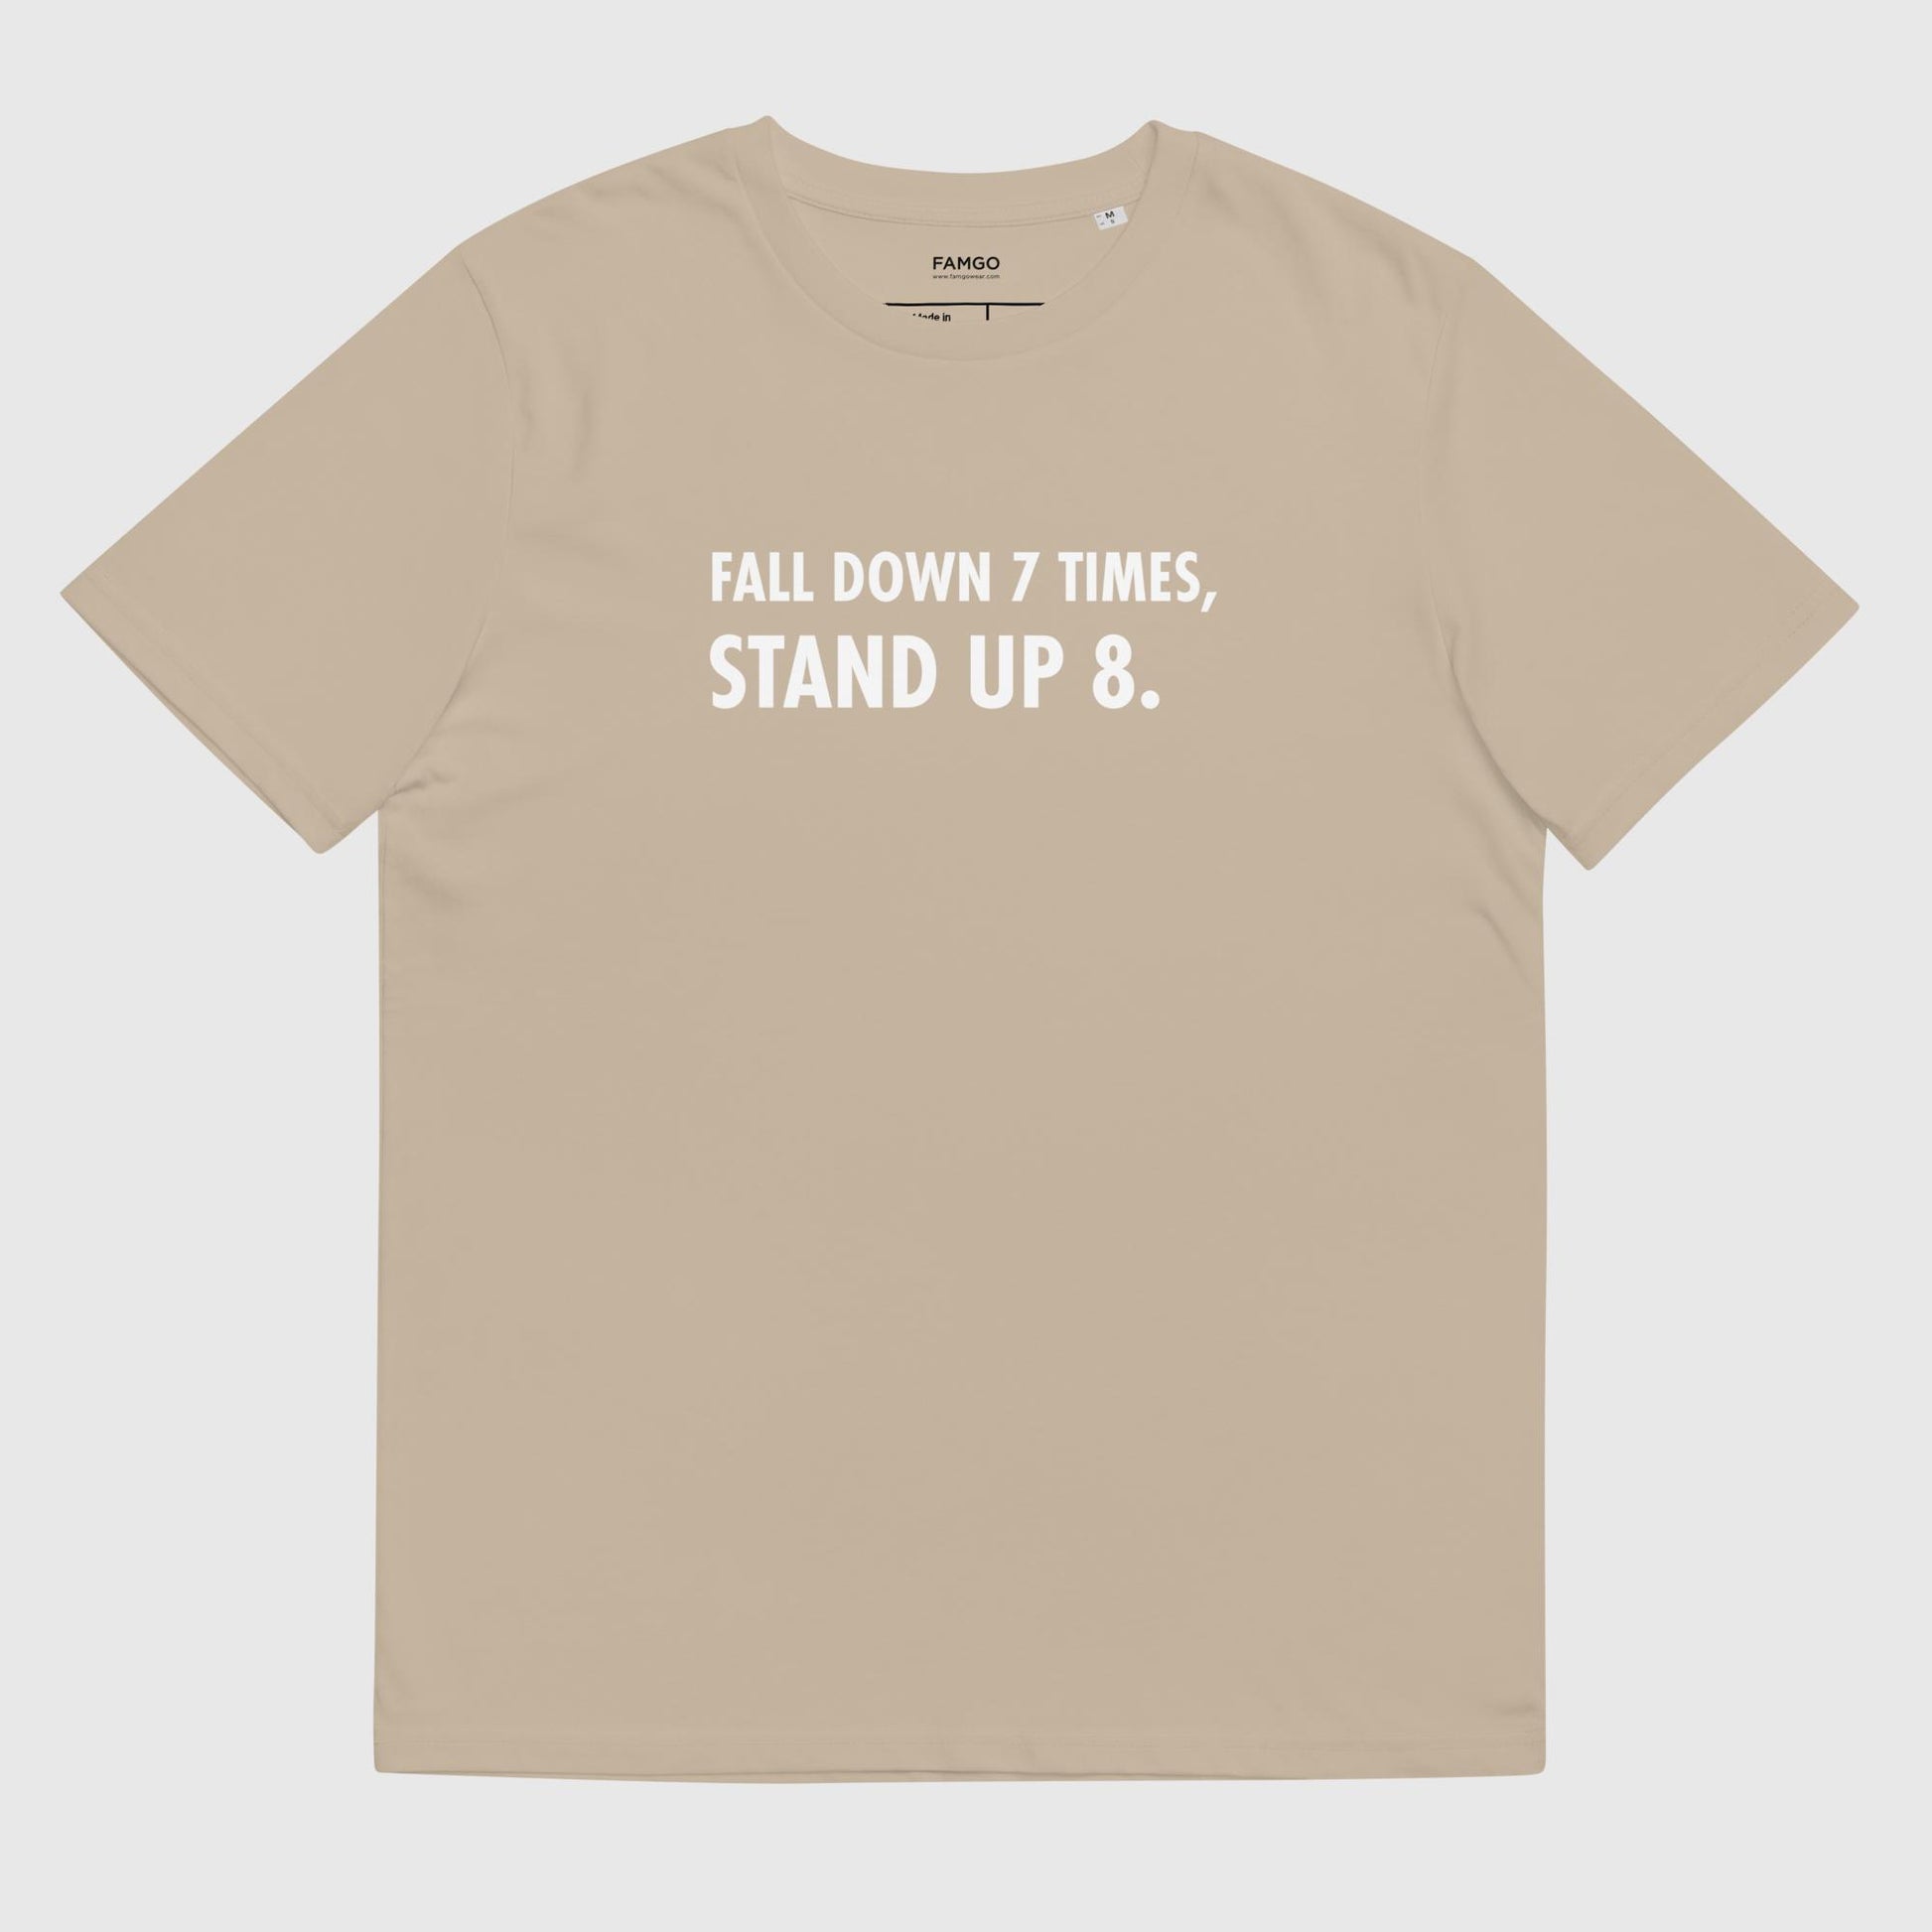 Men's desert dust organic cotton t-shirt that features the Japanese proverb "Fall Down 7 Times, Stand Up 8."